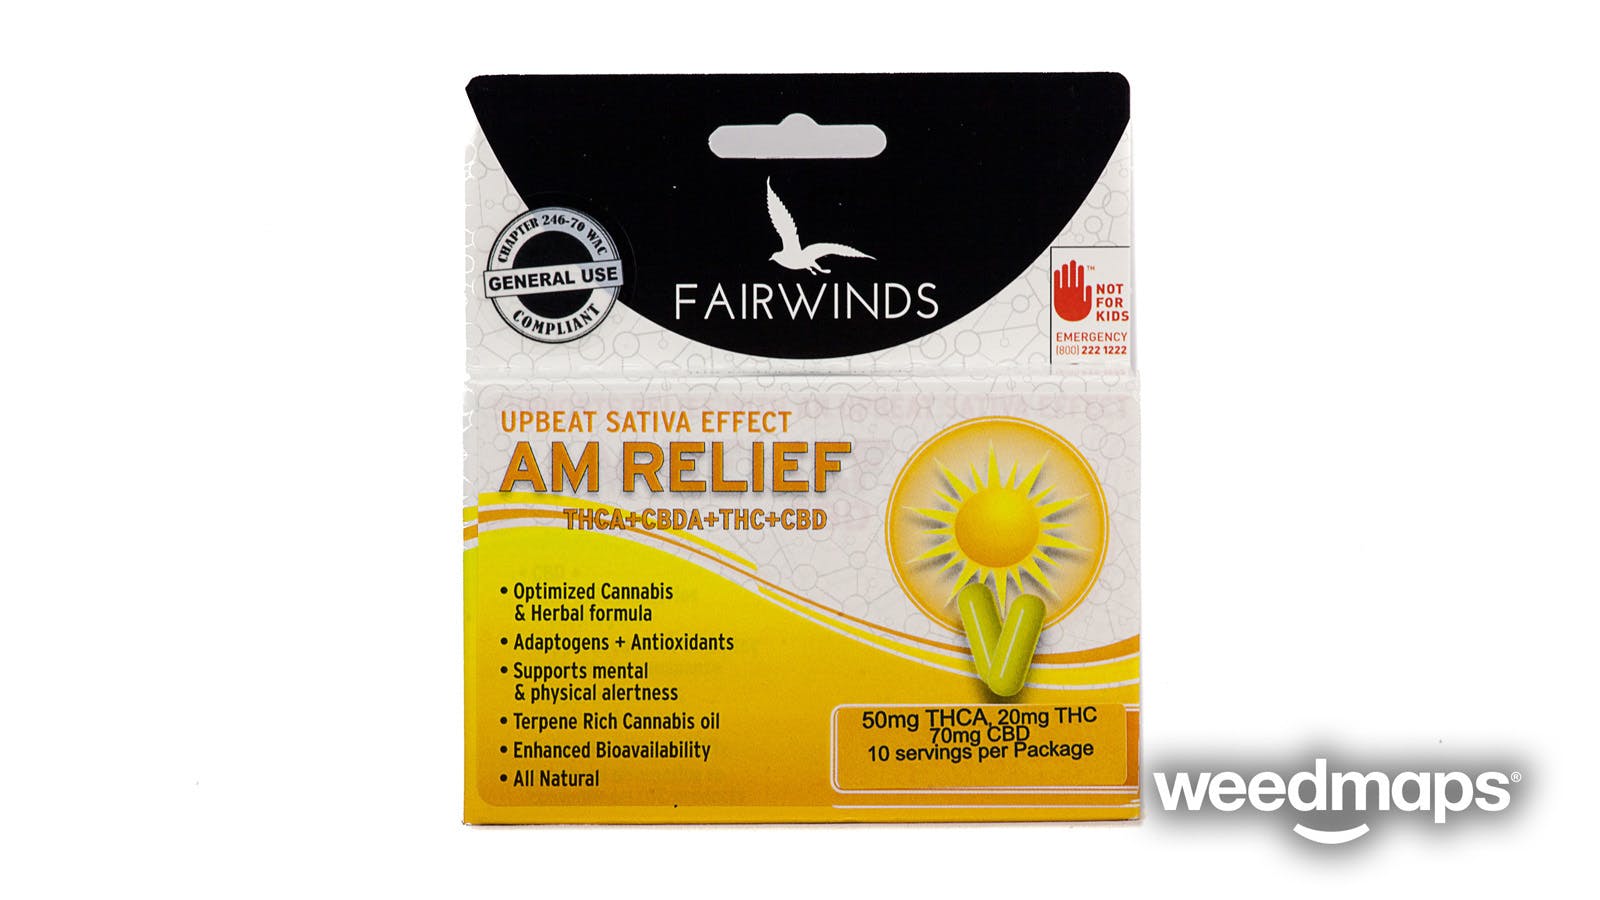 edible-fairwinds-capsule-10-pack-am-relief-10mg